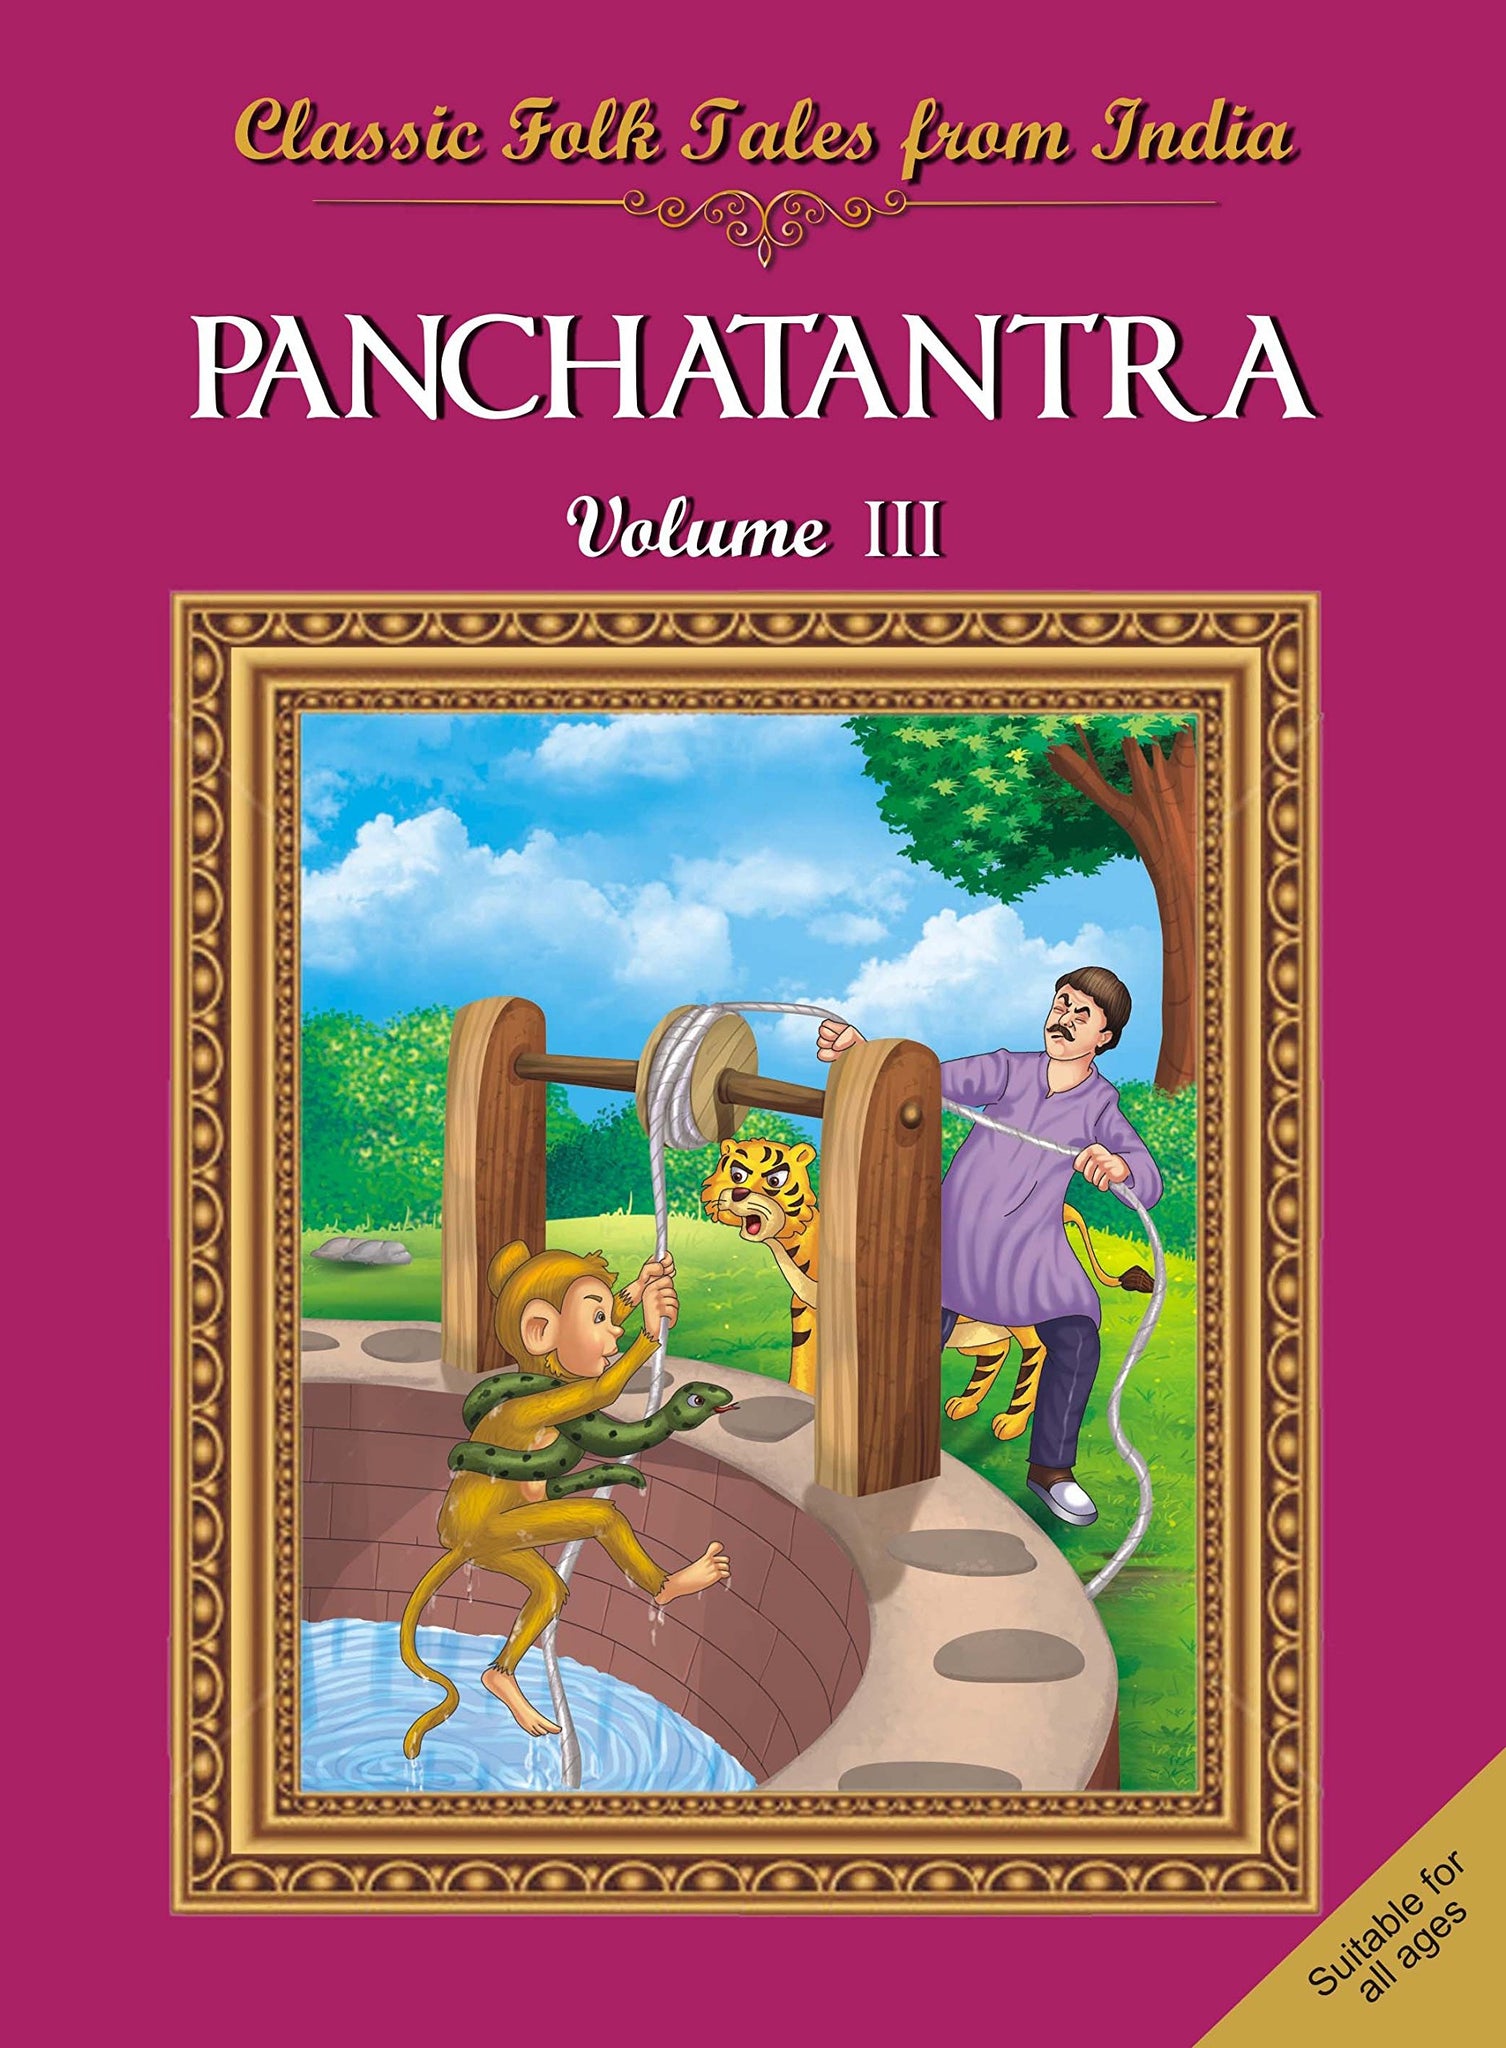 Classic Folk TalesFrom India :Panchatantra Vol III